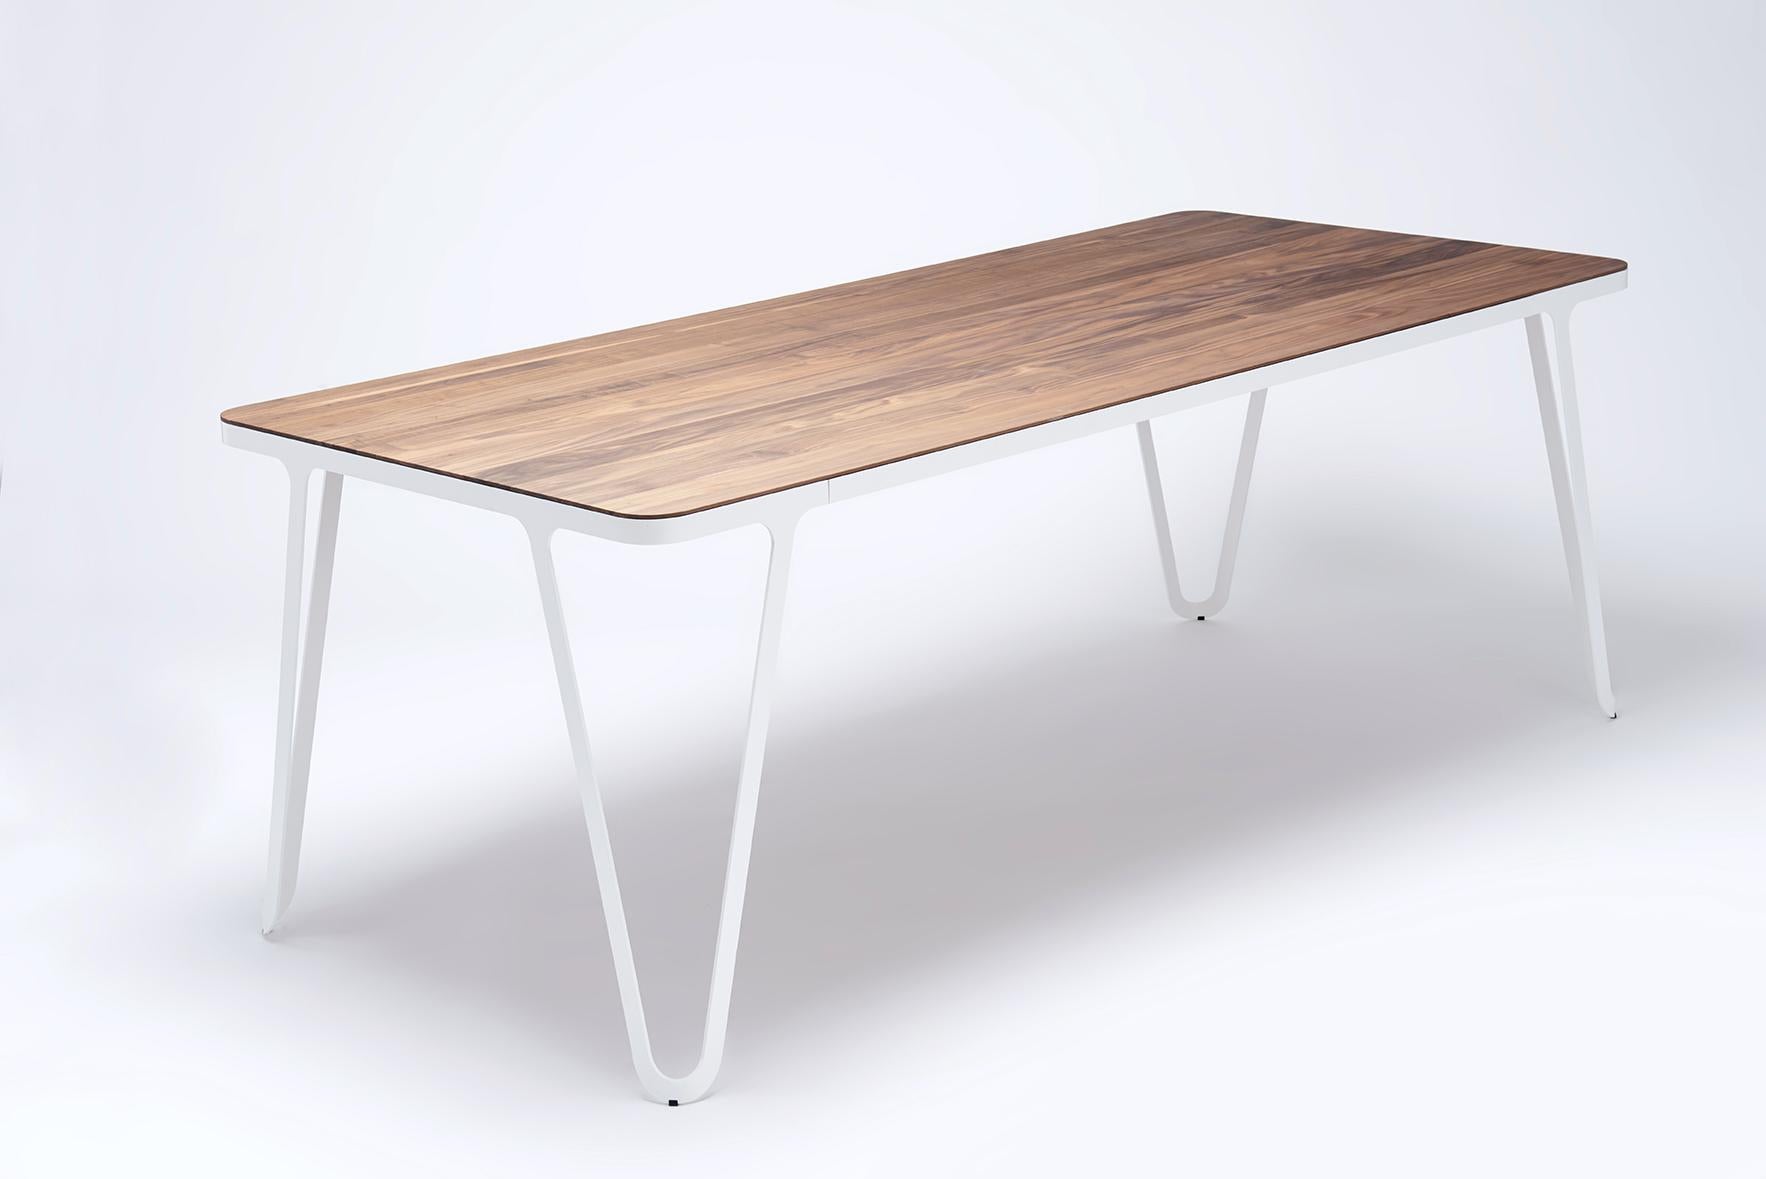 Loop table 200 Ash by Sebastian Scherer
Dimensions: D200 x W90 x H74 cm
Materials: Ash, Aluminium, Wood
Weight: 57.8 kg
Also Available: Colours:Solid wood (matt lacquered or oiled): black and white stained ash / natural oak / american